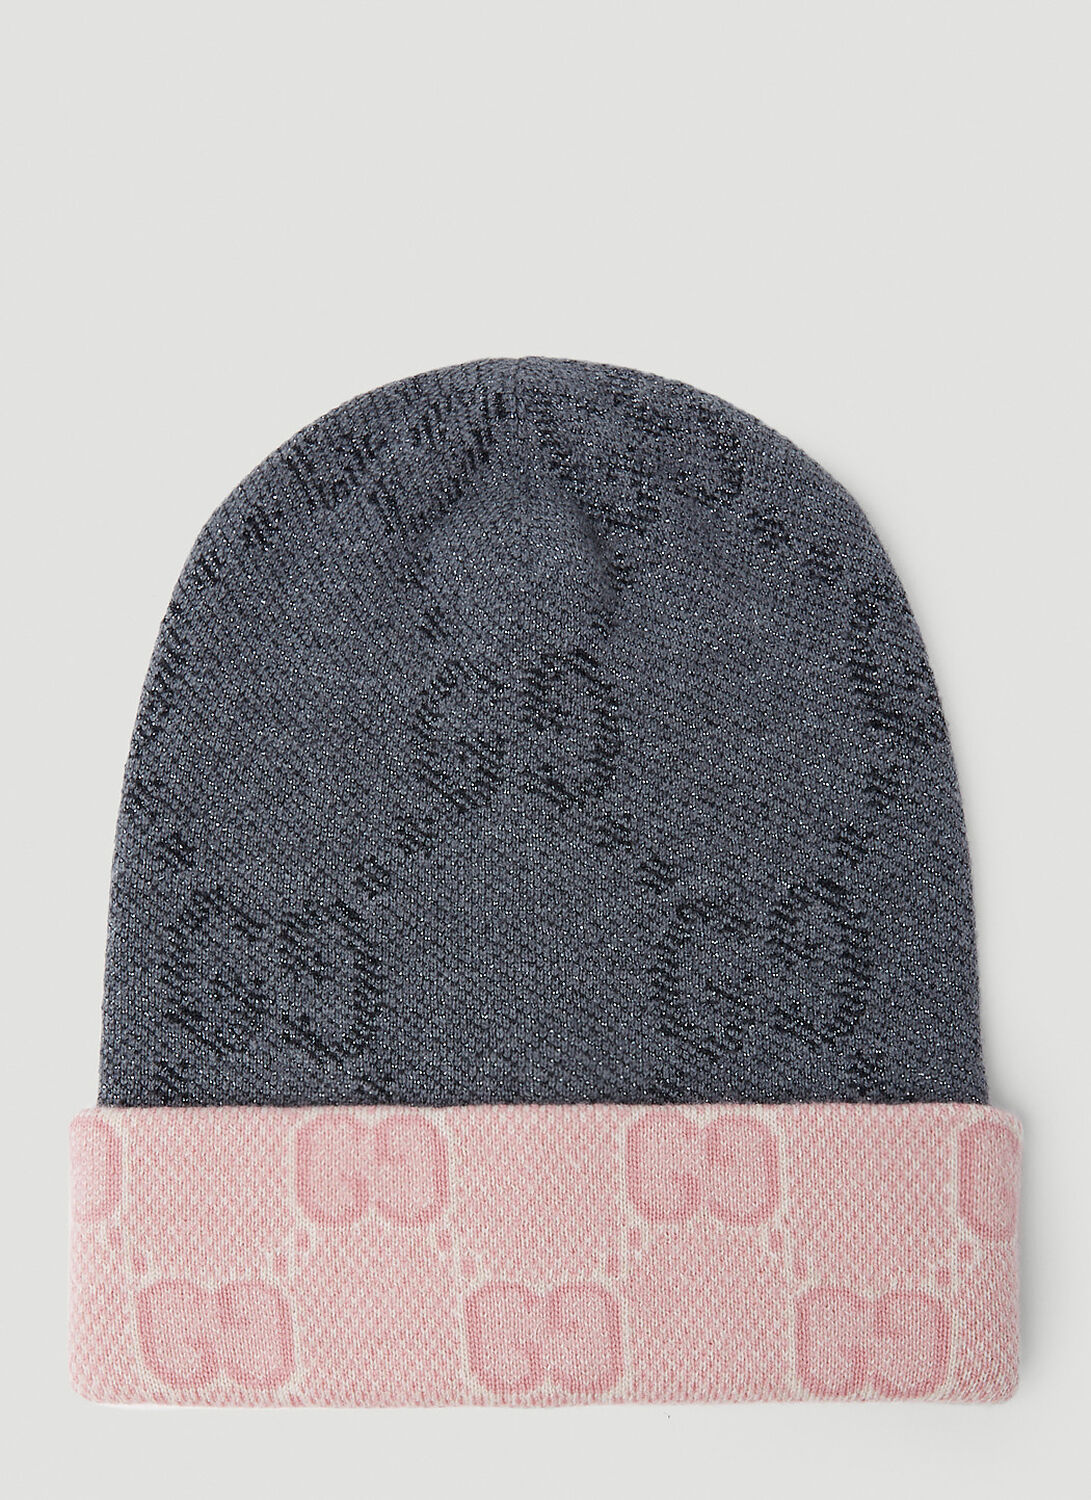 Gucci Reversible Gg Beanie Hat In Grey